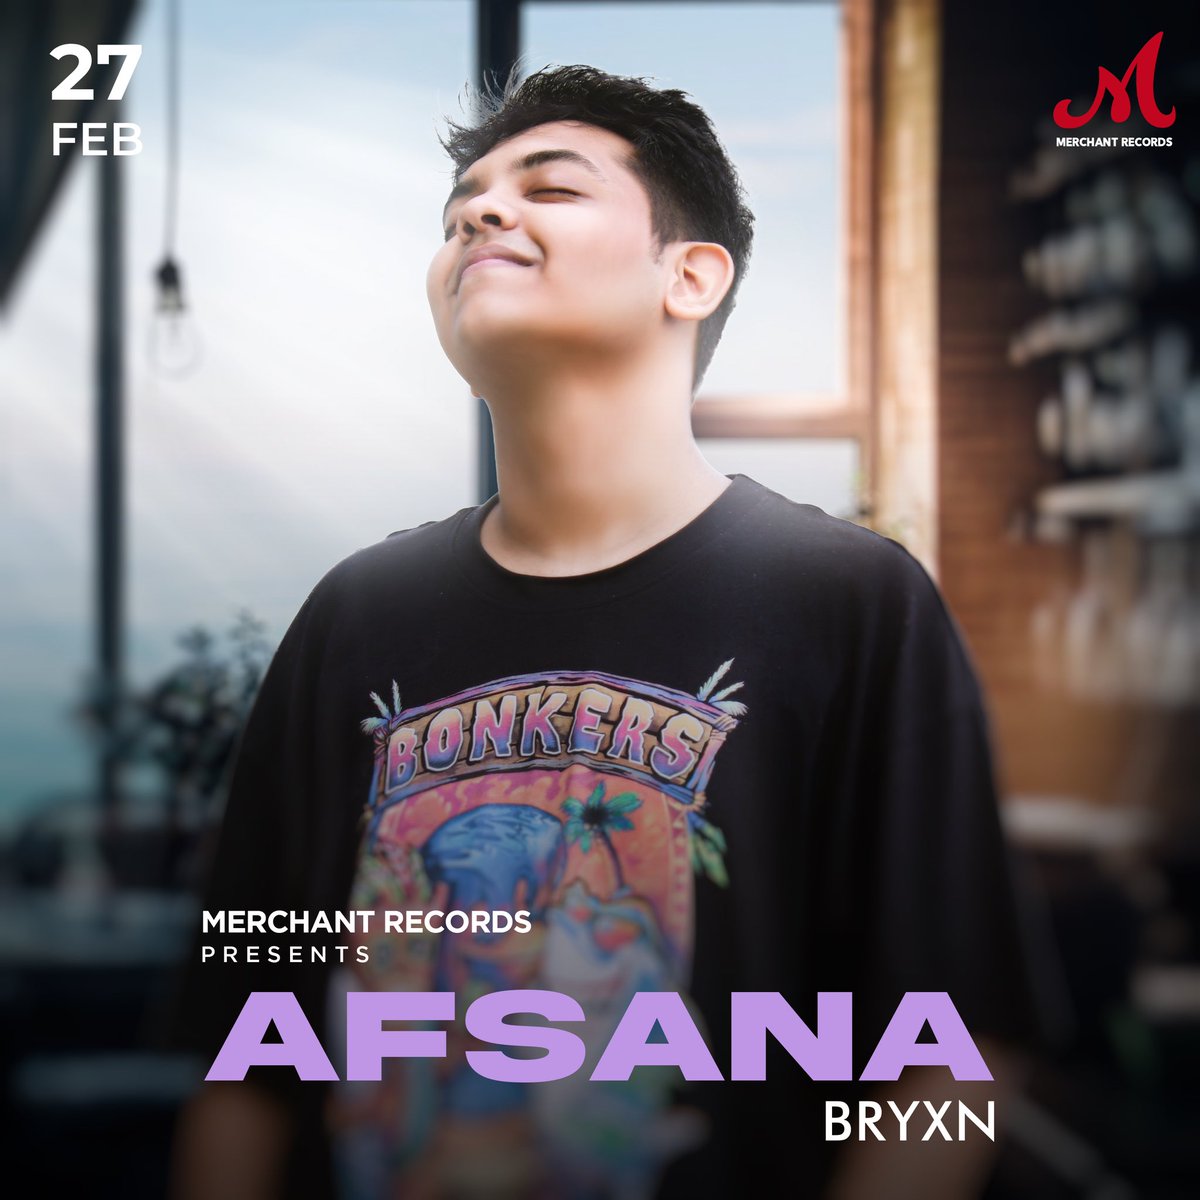 Get ready for a captivating journey with #Afsana by #Bryan, dropping Feb 27 on @SlimSulaiman’s YouTube channel. Tune in for musical magic! 🎶 #NewRelease #MerchantRecords #SalimSulaiman